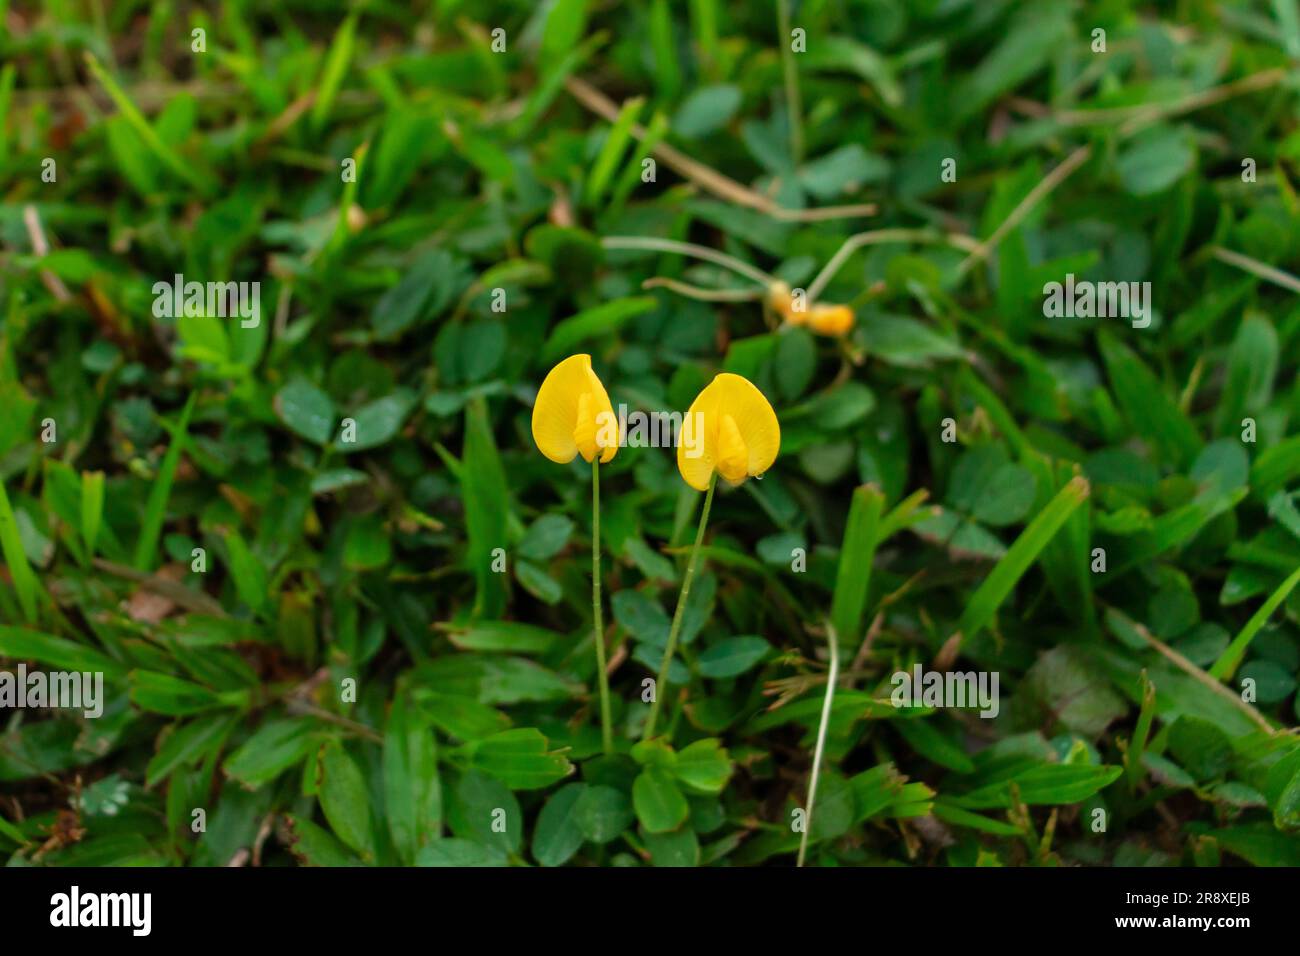 A tiny yellow flowers, after some edits. Stock Photo